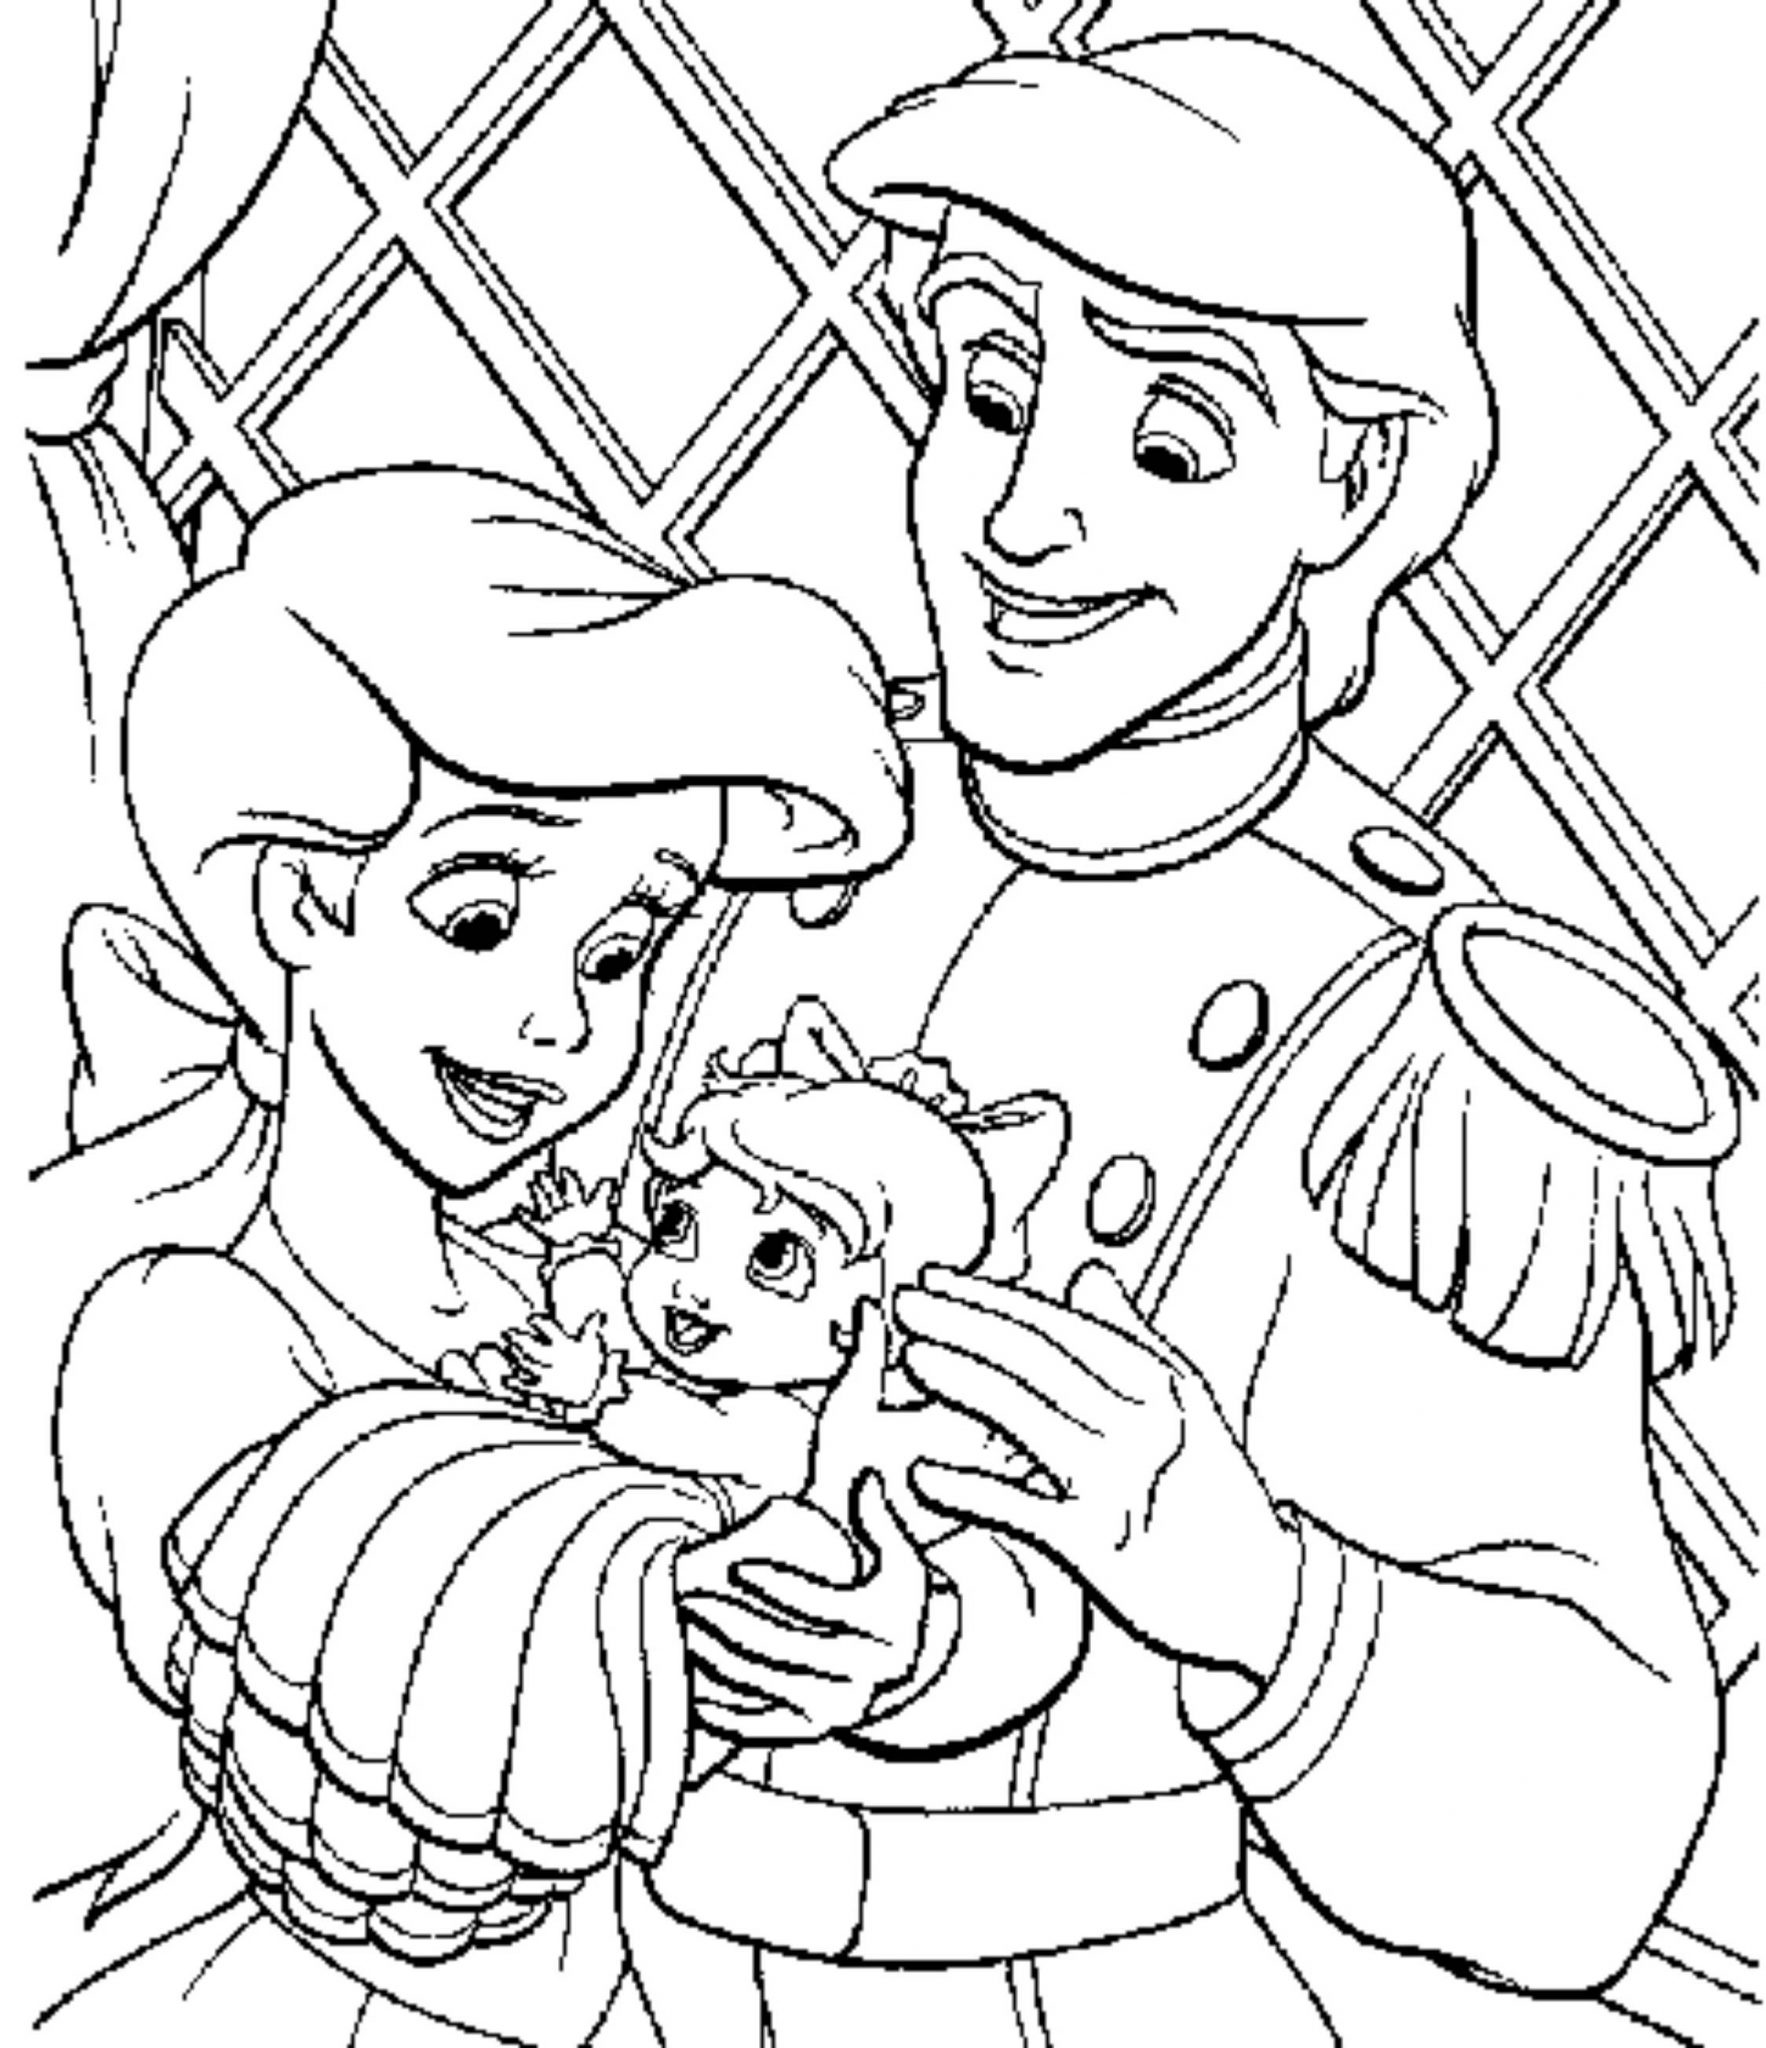 get-princess-free-printable-coloring-pages-for-kids-background-colorist